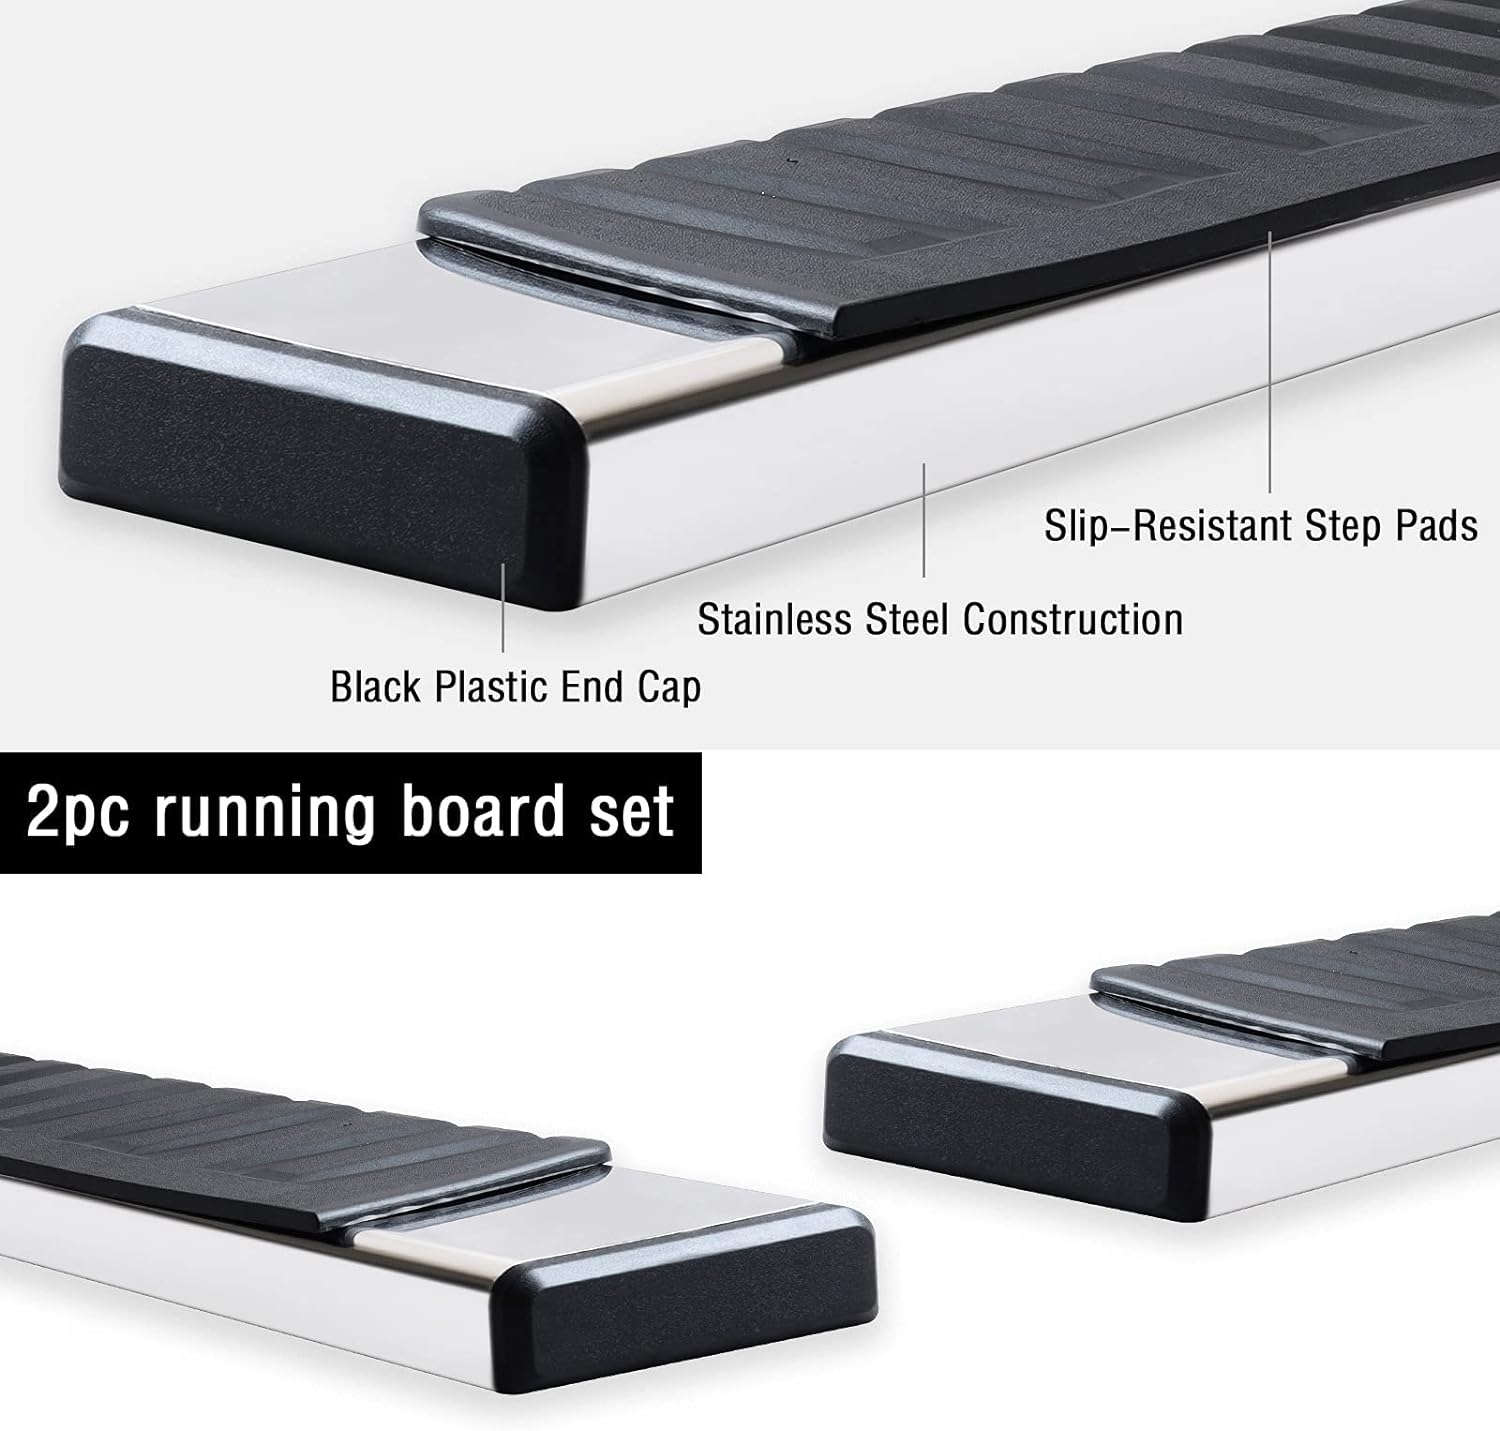 Running Boards Compatible with 2006-2014 Honda Ridgeline, Stainless Steel Side Steps H6 Style.